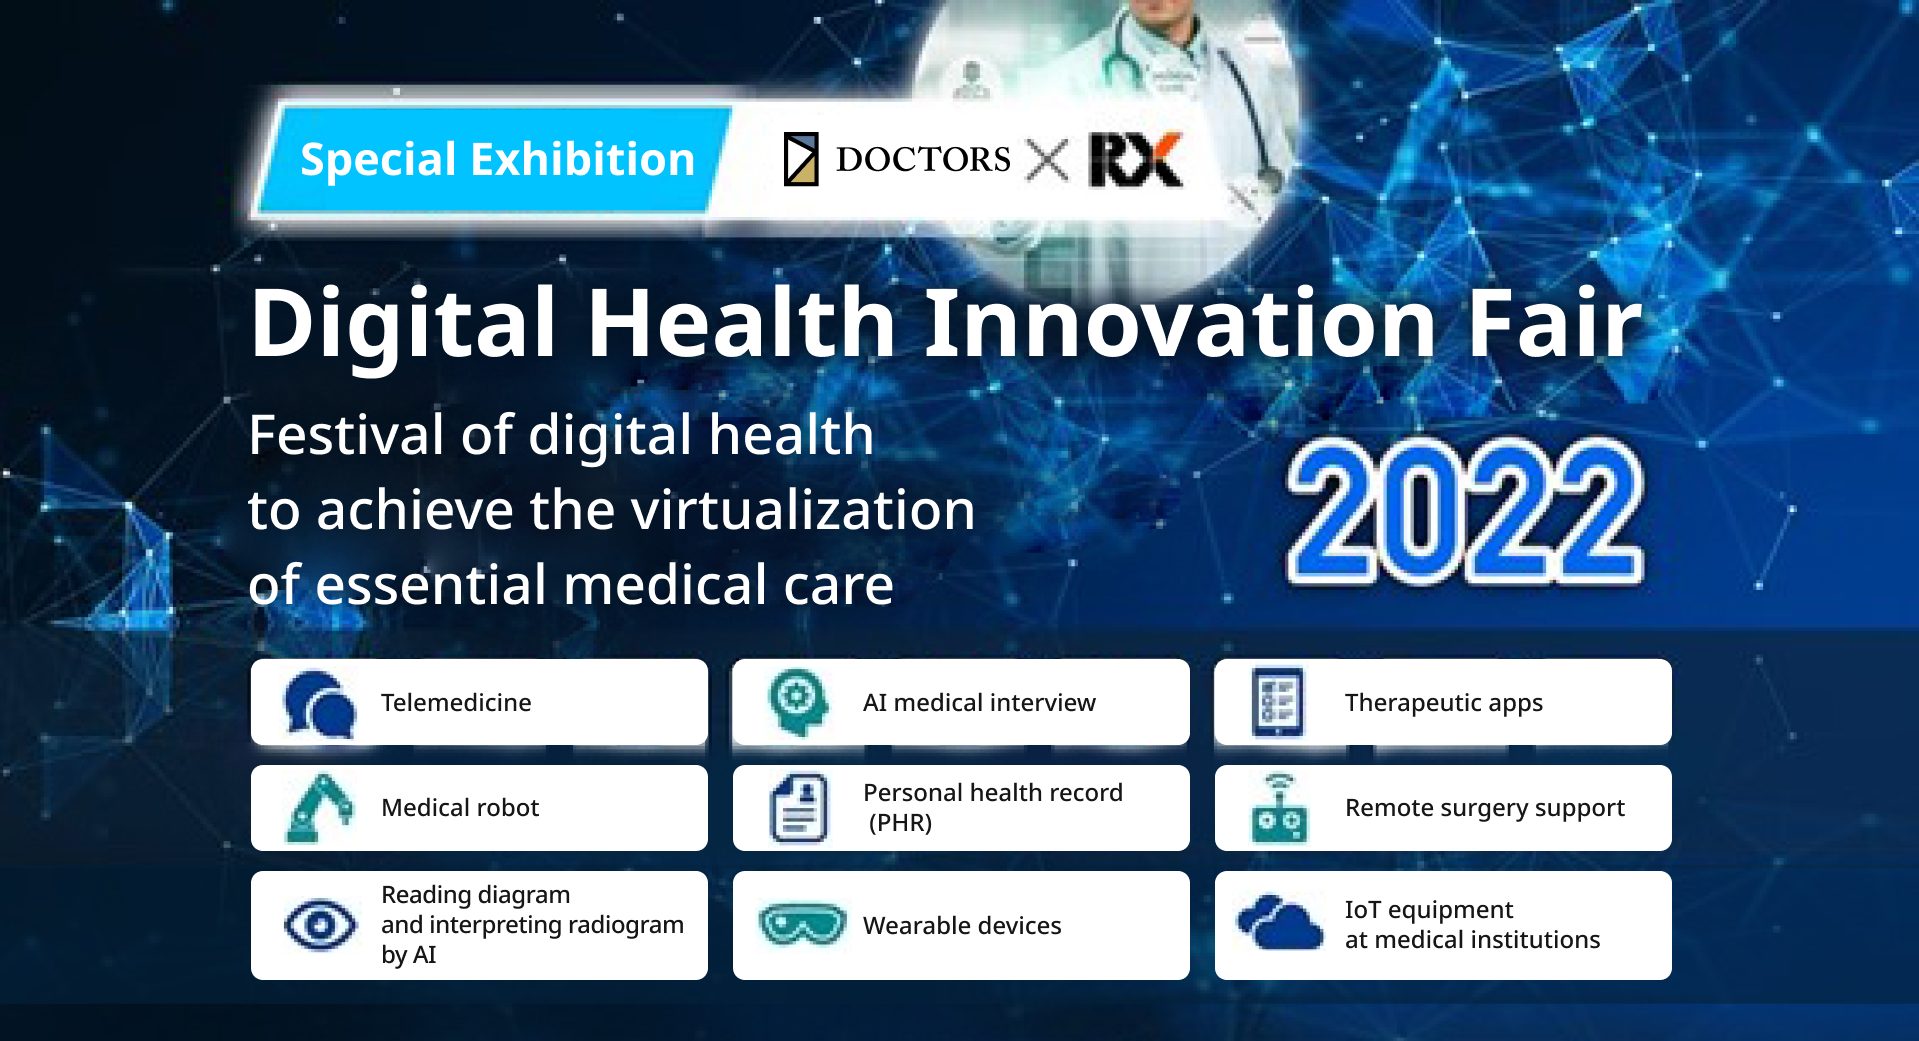 RX Japan and DOCTORS have decided to co-sponsor Digital Health Innovation Fair 2022 and started the recruitment of exhibitors. <br>– With benefits exclusive to this fair such as “Lecture on Special Stage” and “Support for Promotion” –